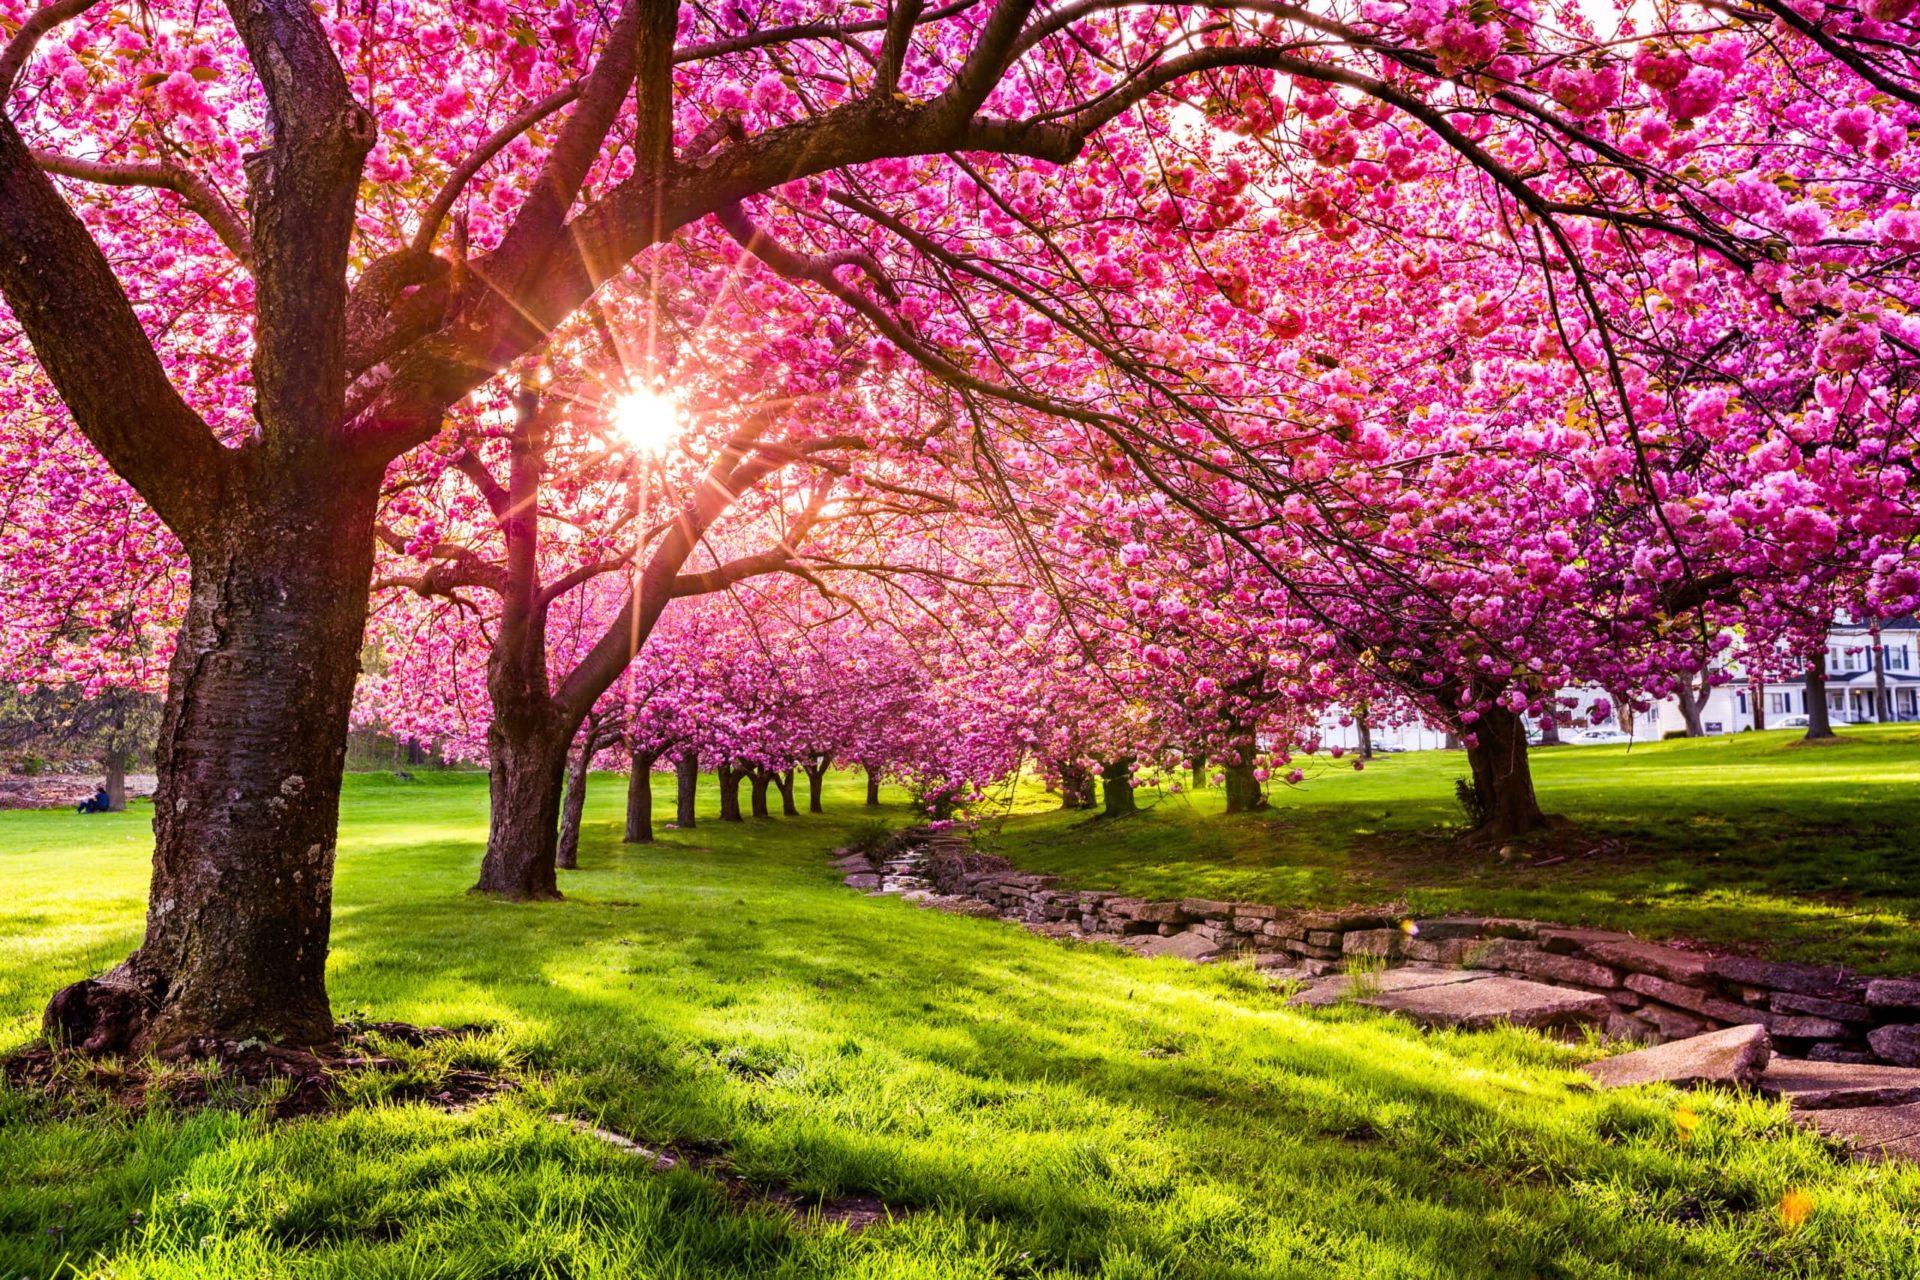 10 Interesting Facts About Cherry Blossoms You Didn't Know